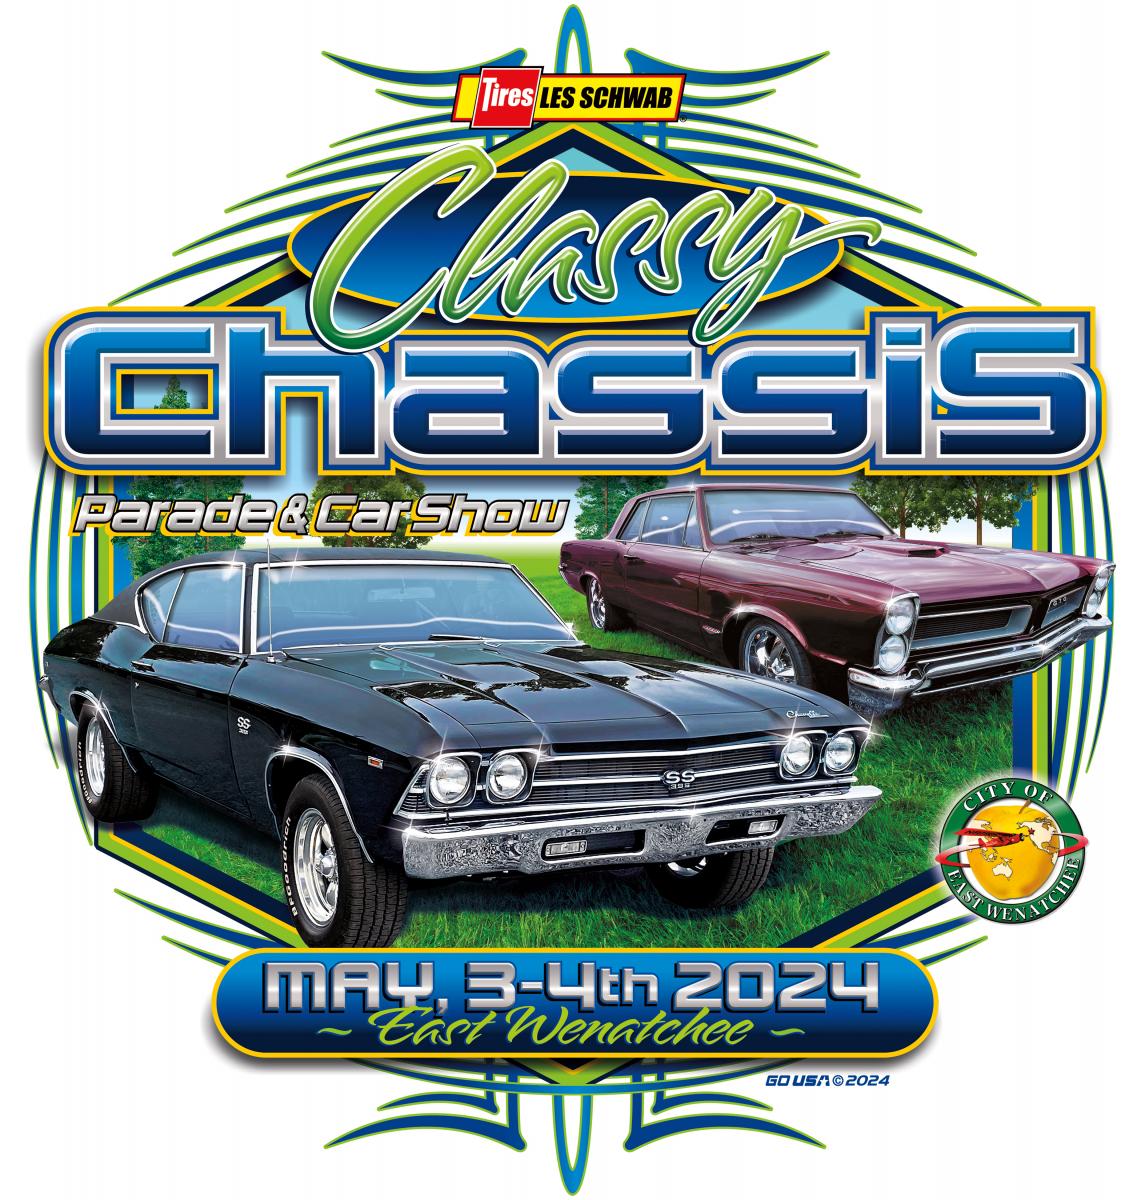 Classy Chassis Parade/ Car Show 2024 cover image